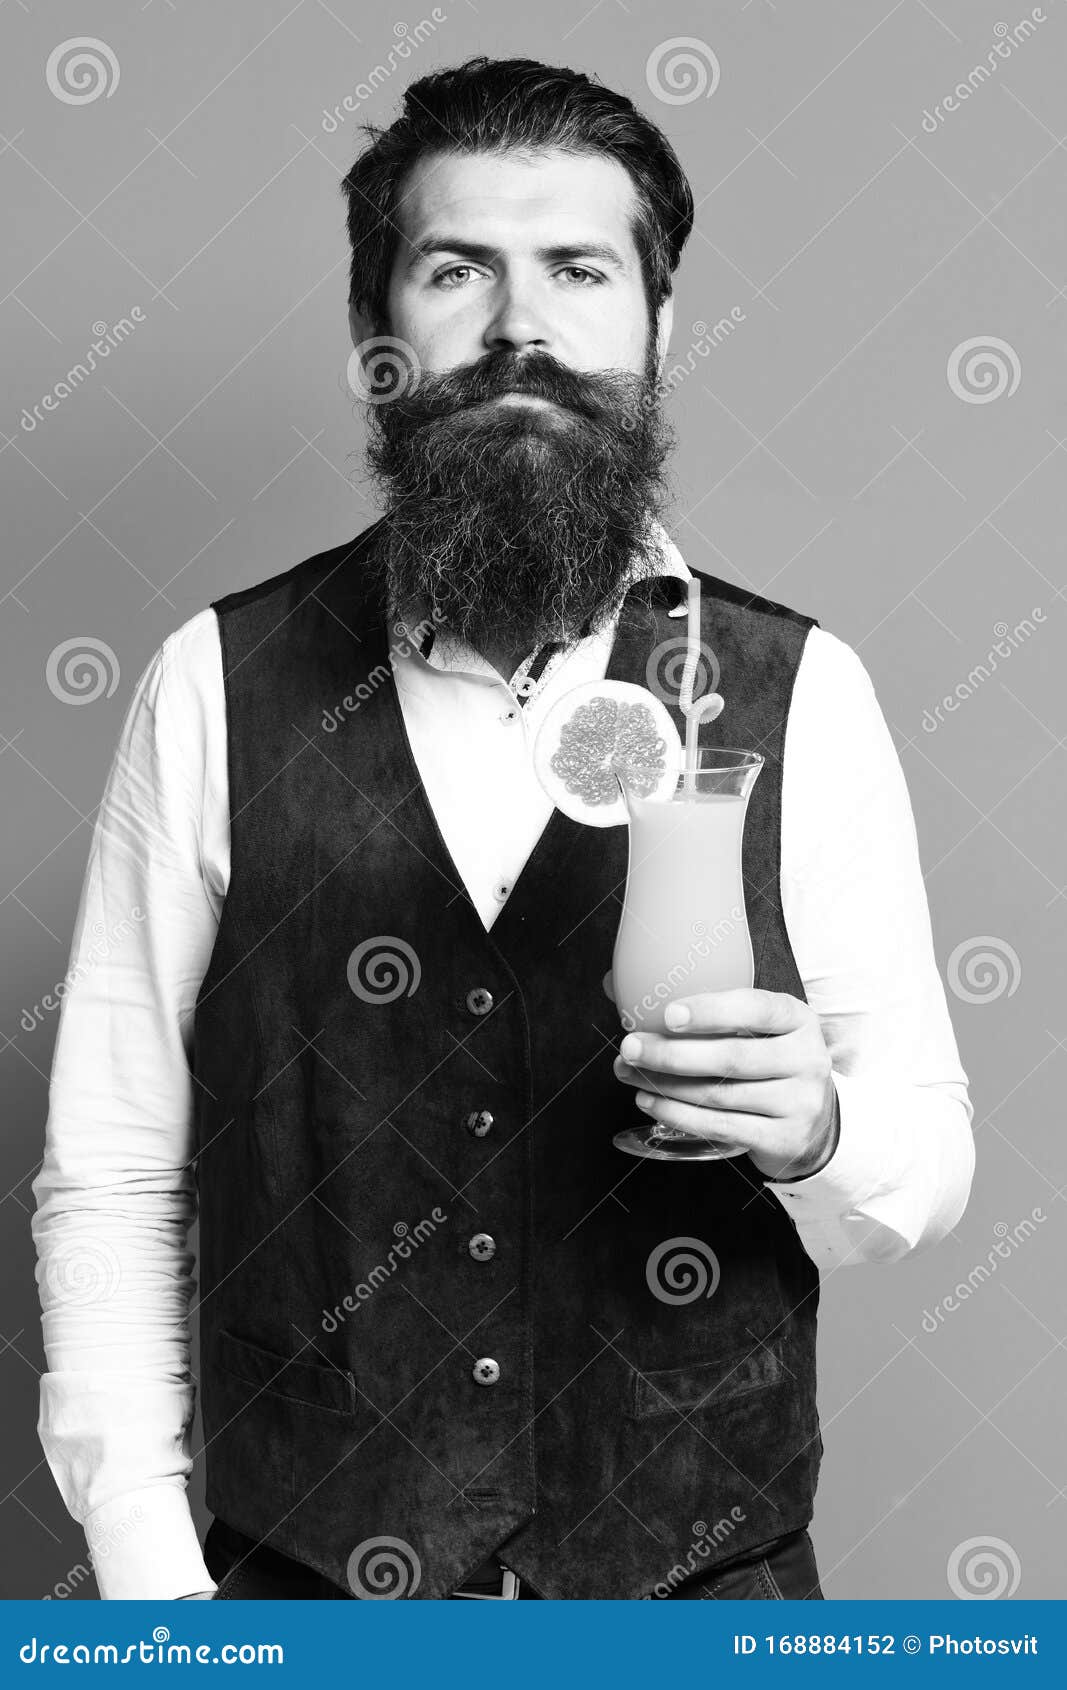 Serious Handsome Bearded Man with Long Beard Stock Photo - Image of ...